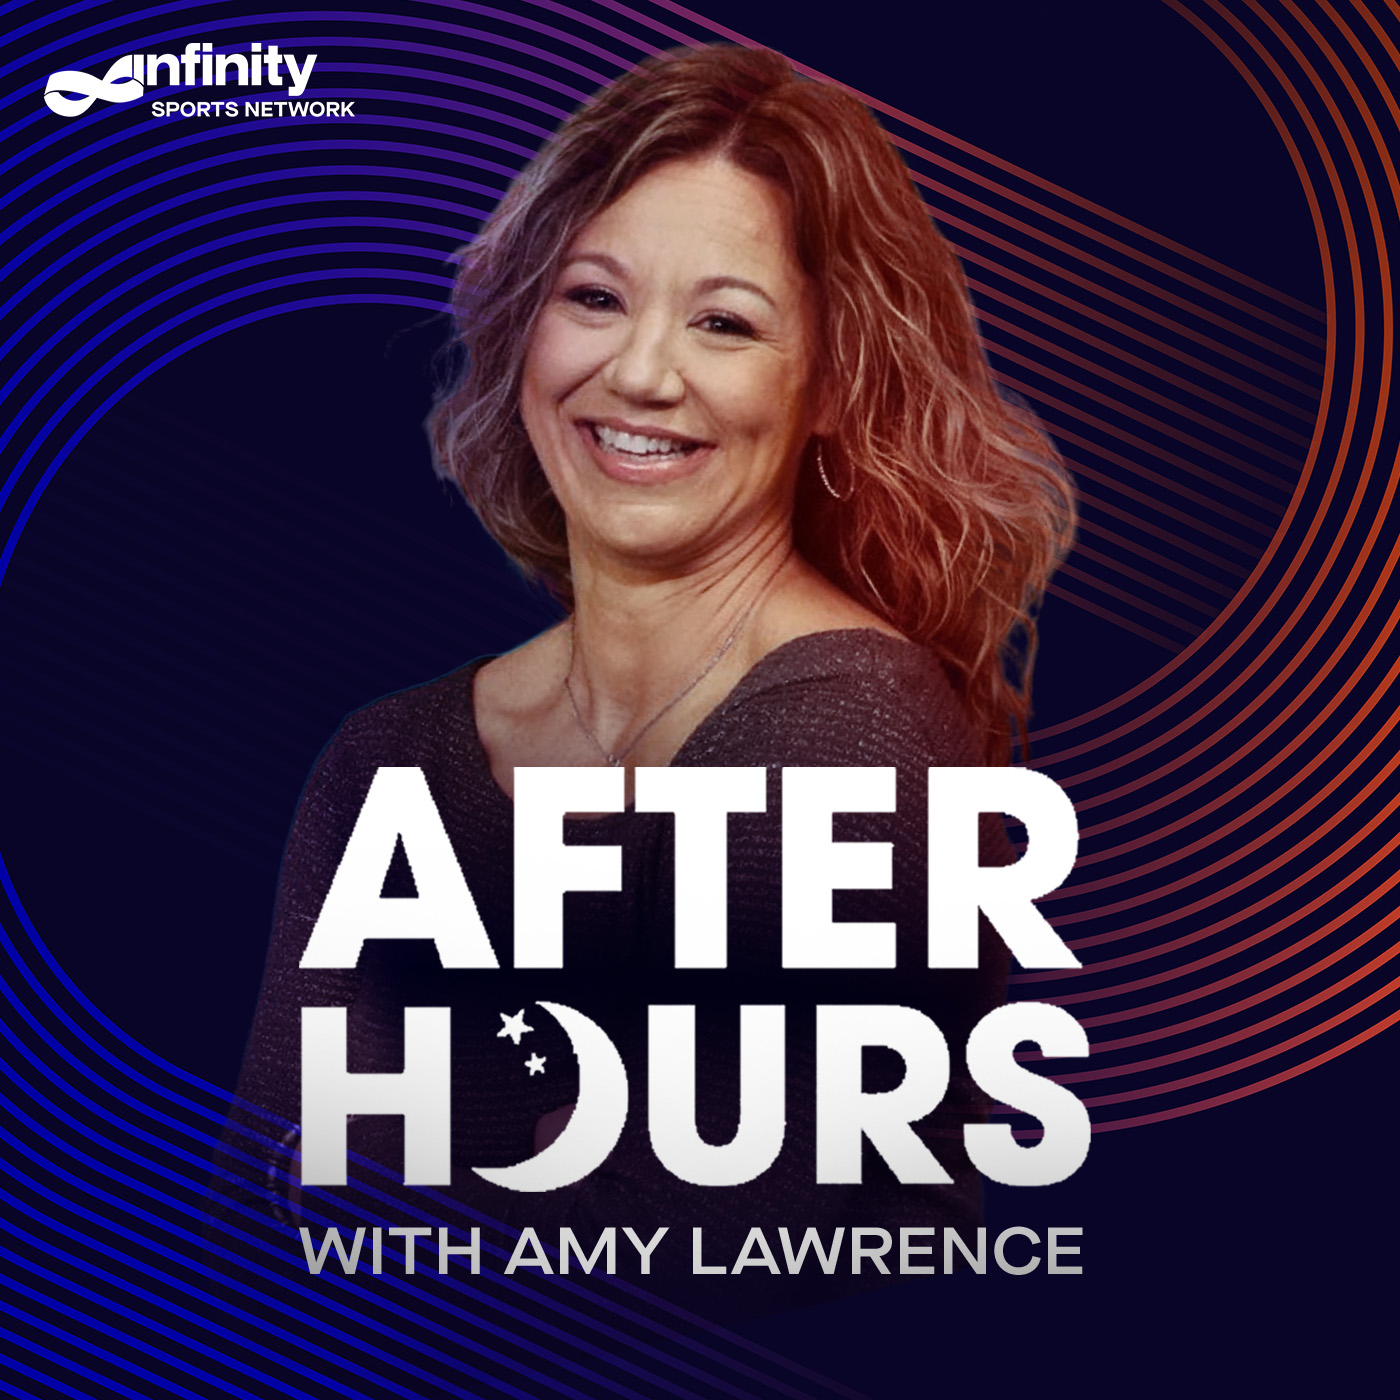 7/13/21 After Hours with Amy Lawrence PODCAST: Hour 3